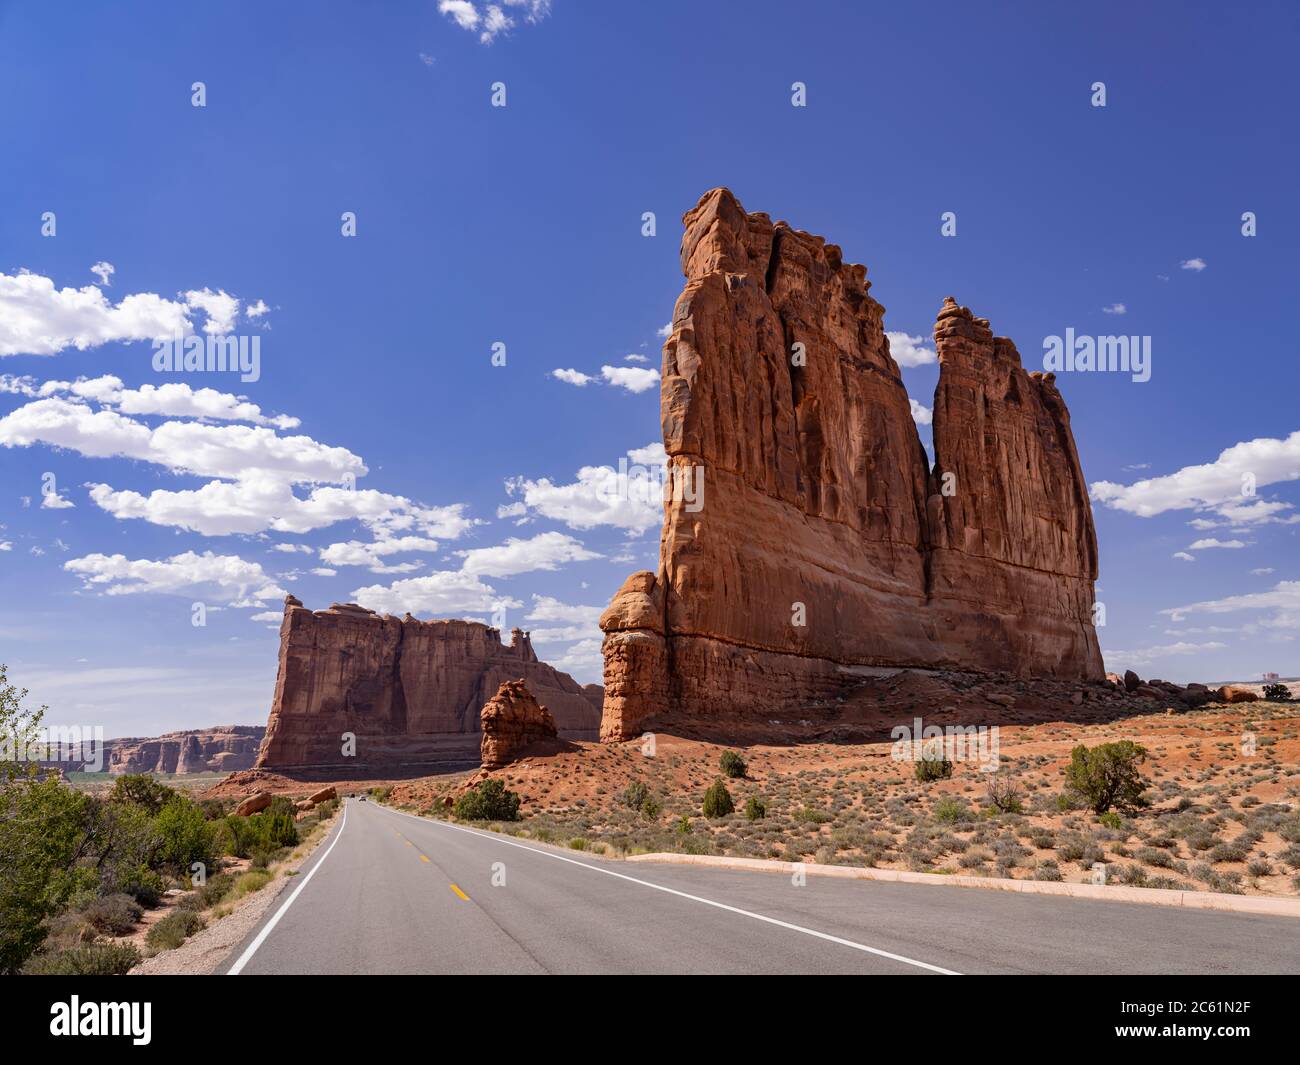 Courthouse Towers, Arches National Park, Utah, Stati Uniti d'America Foto Stock